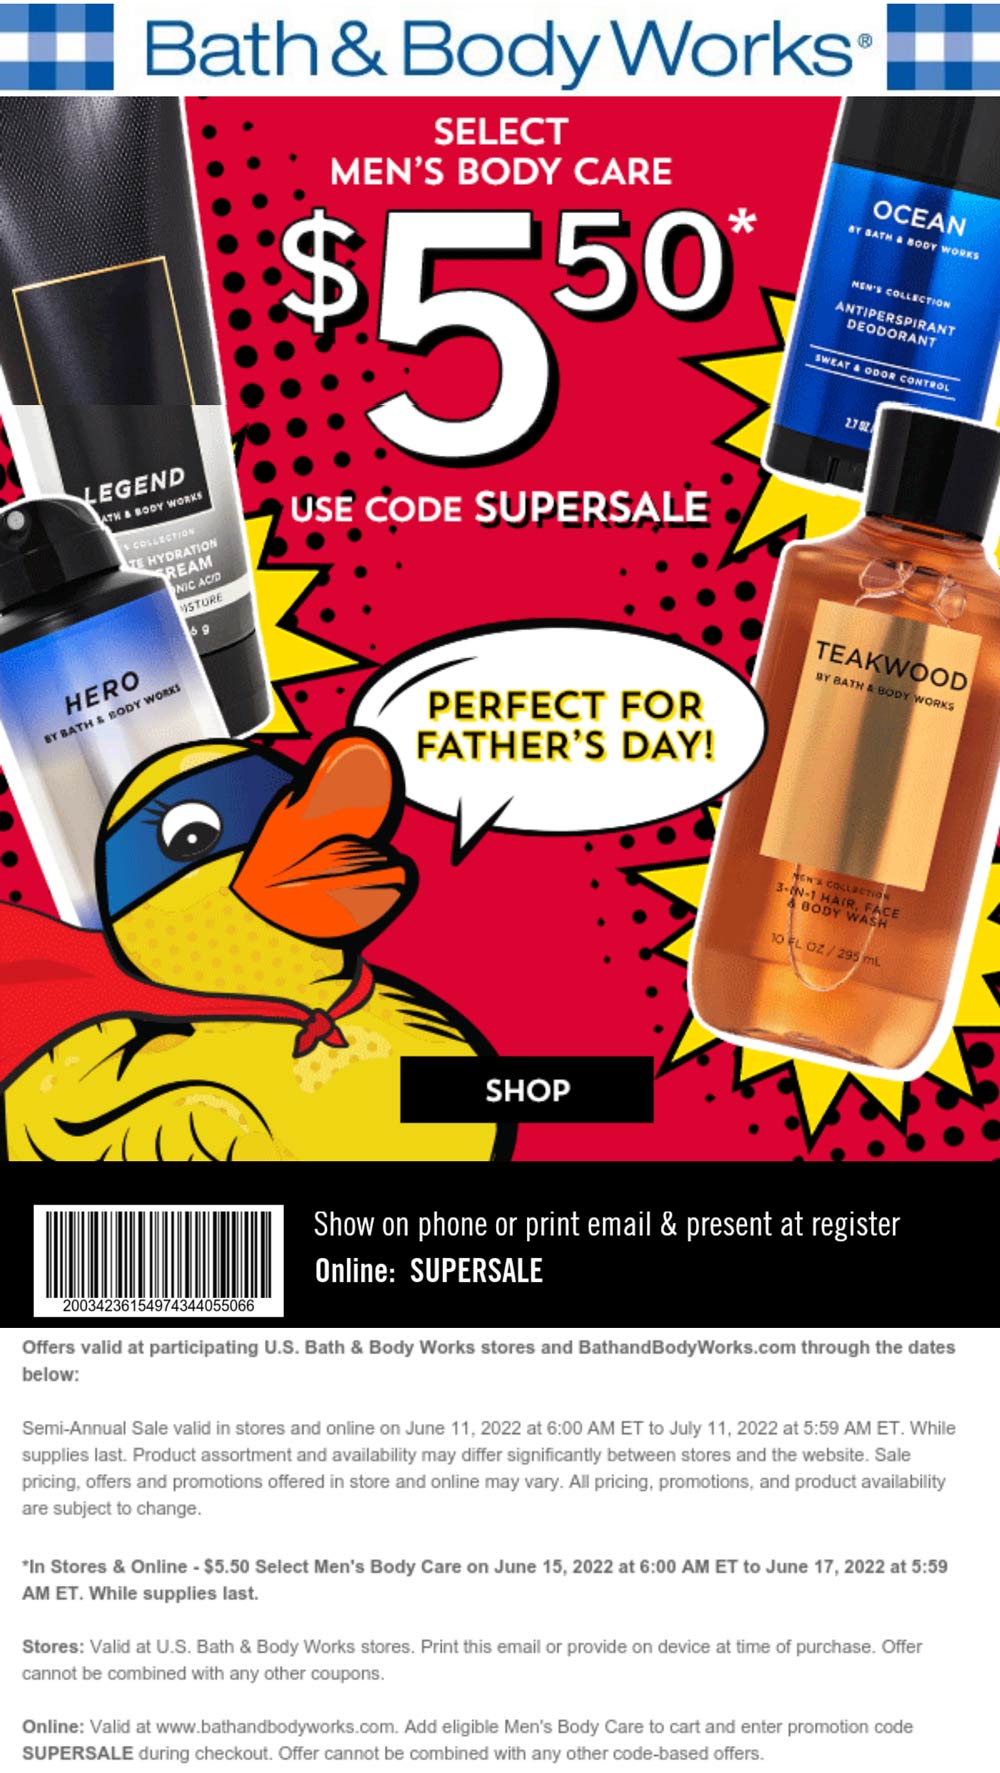 Bath & Body Works stores Coupon  Mens body care $5.50 today at Bath & Body Works, or online via promo code SUPERSALE #bathbodyworks 